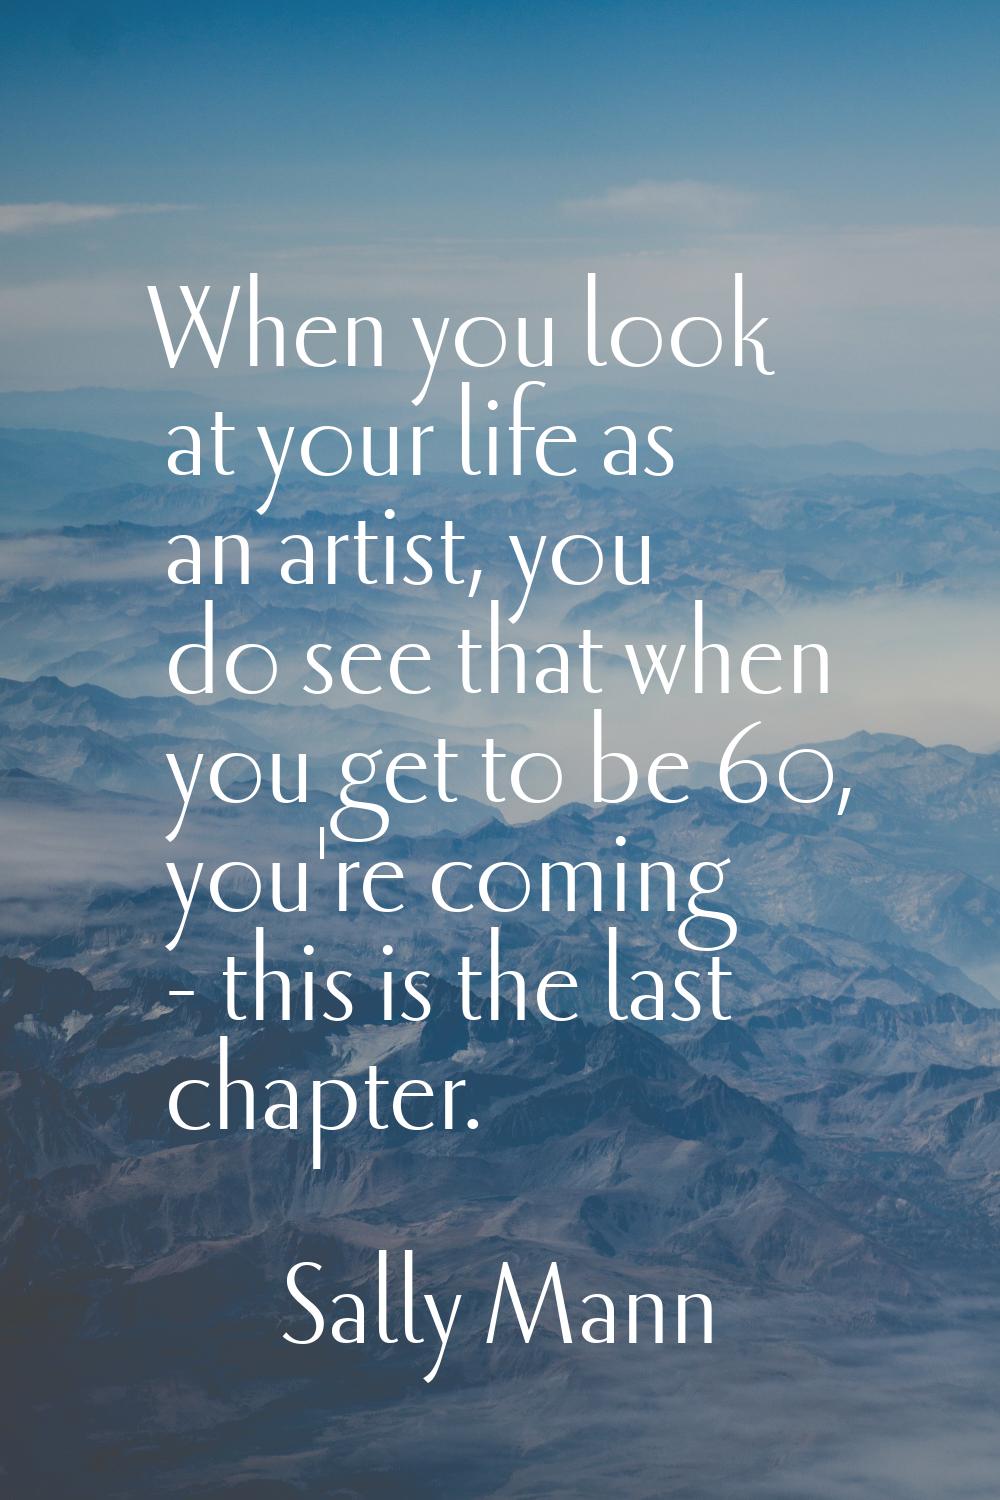 When you look at your life as an artist, you do see that when you get to be 60, you're coming - thi